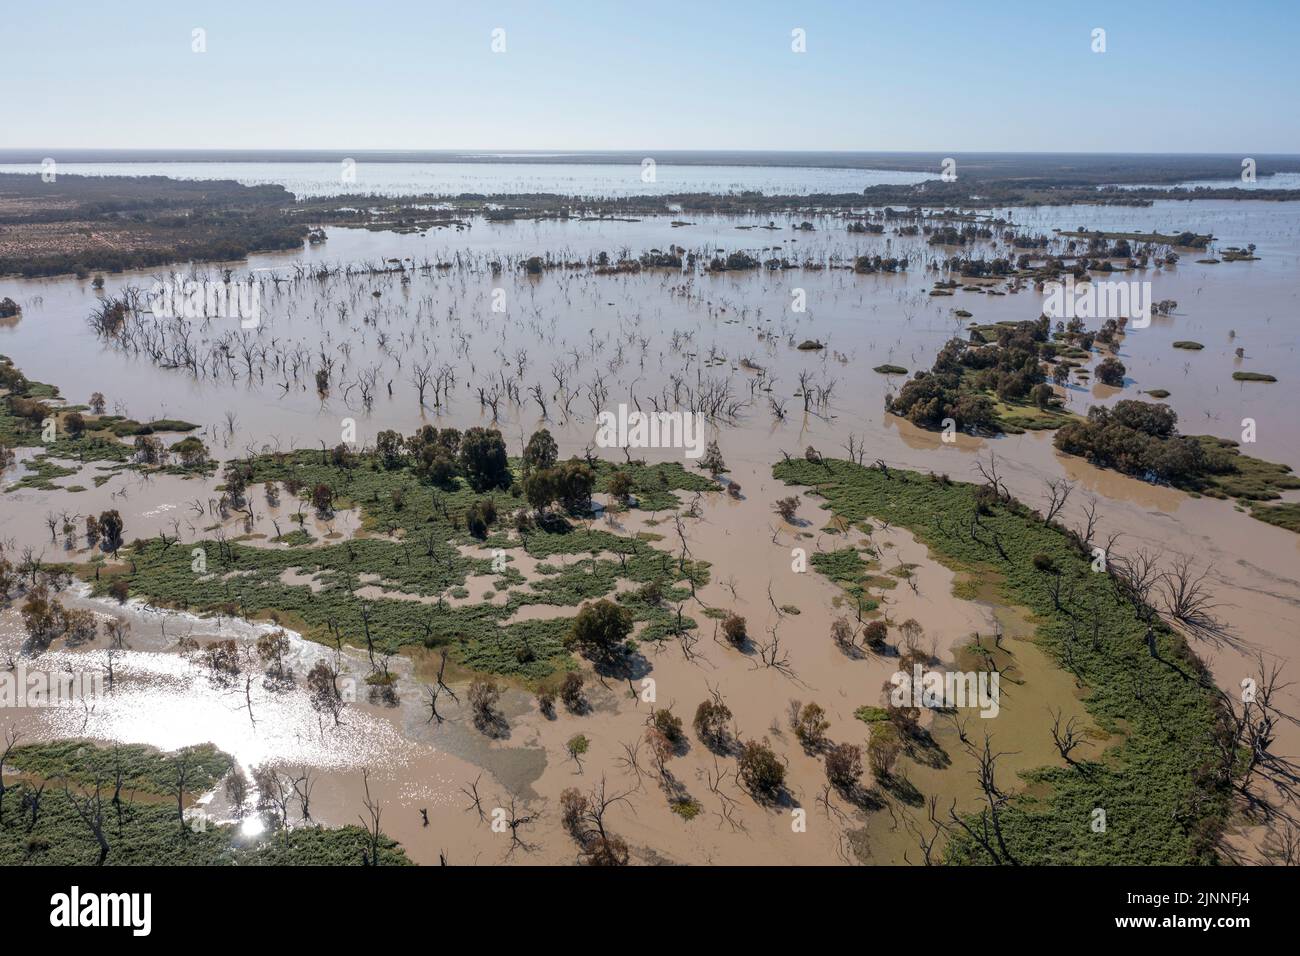 Flood waters from the Darling river fill Menindee lakes in the far west of New South Wales, Australia. Stock Photo